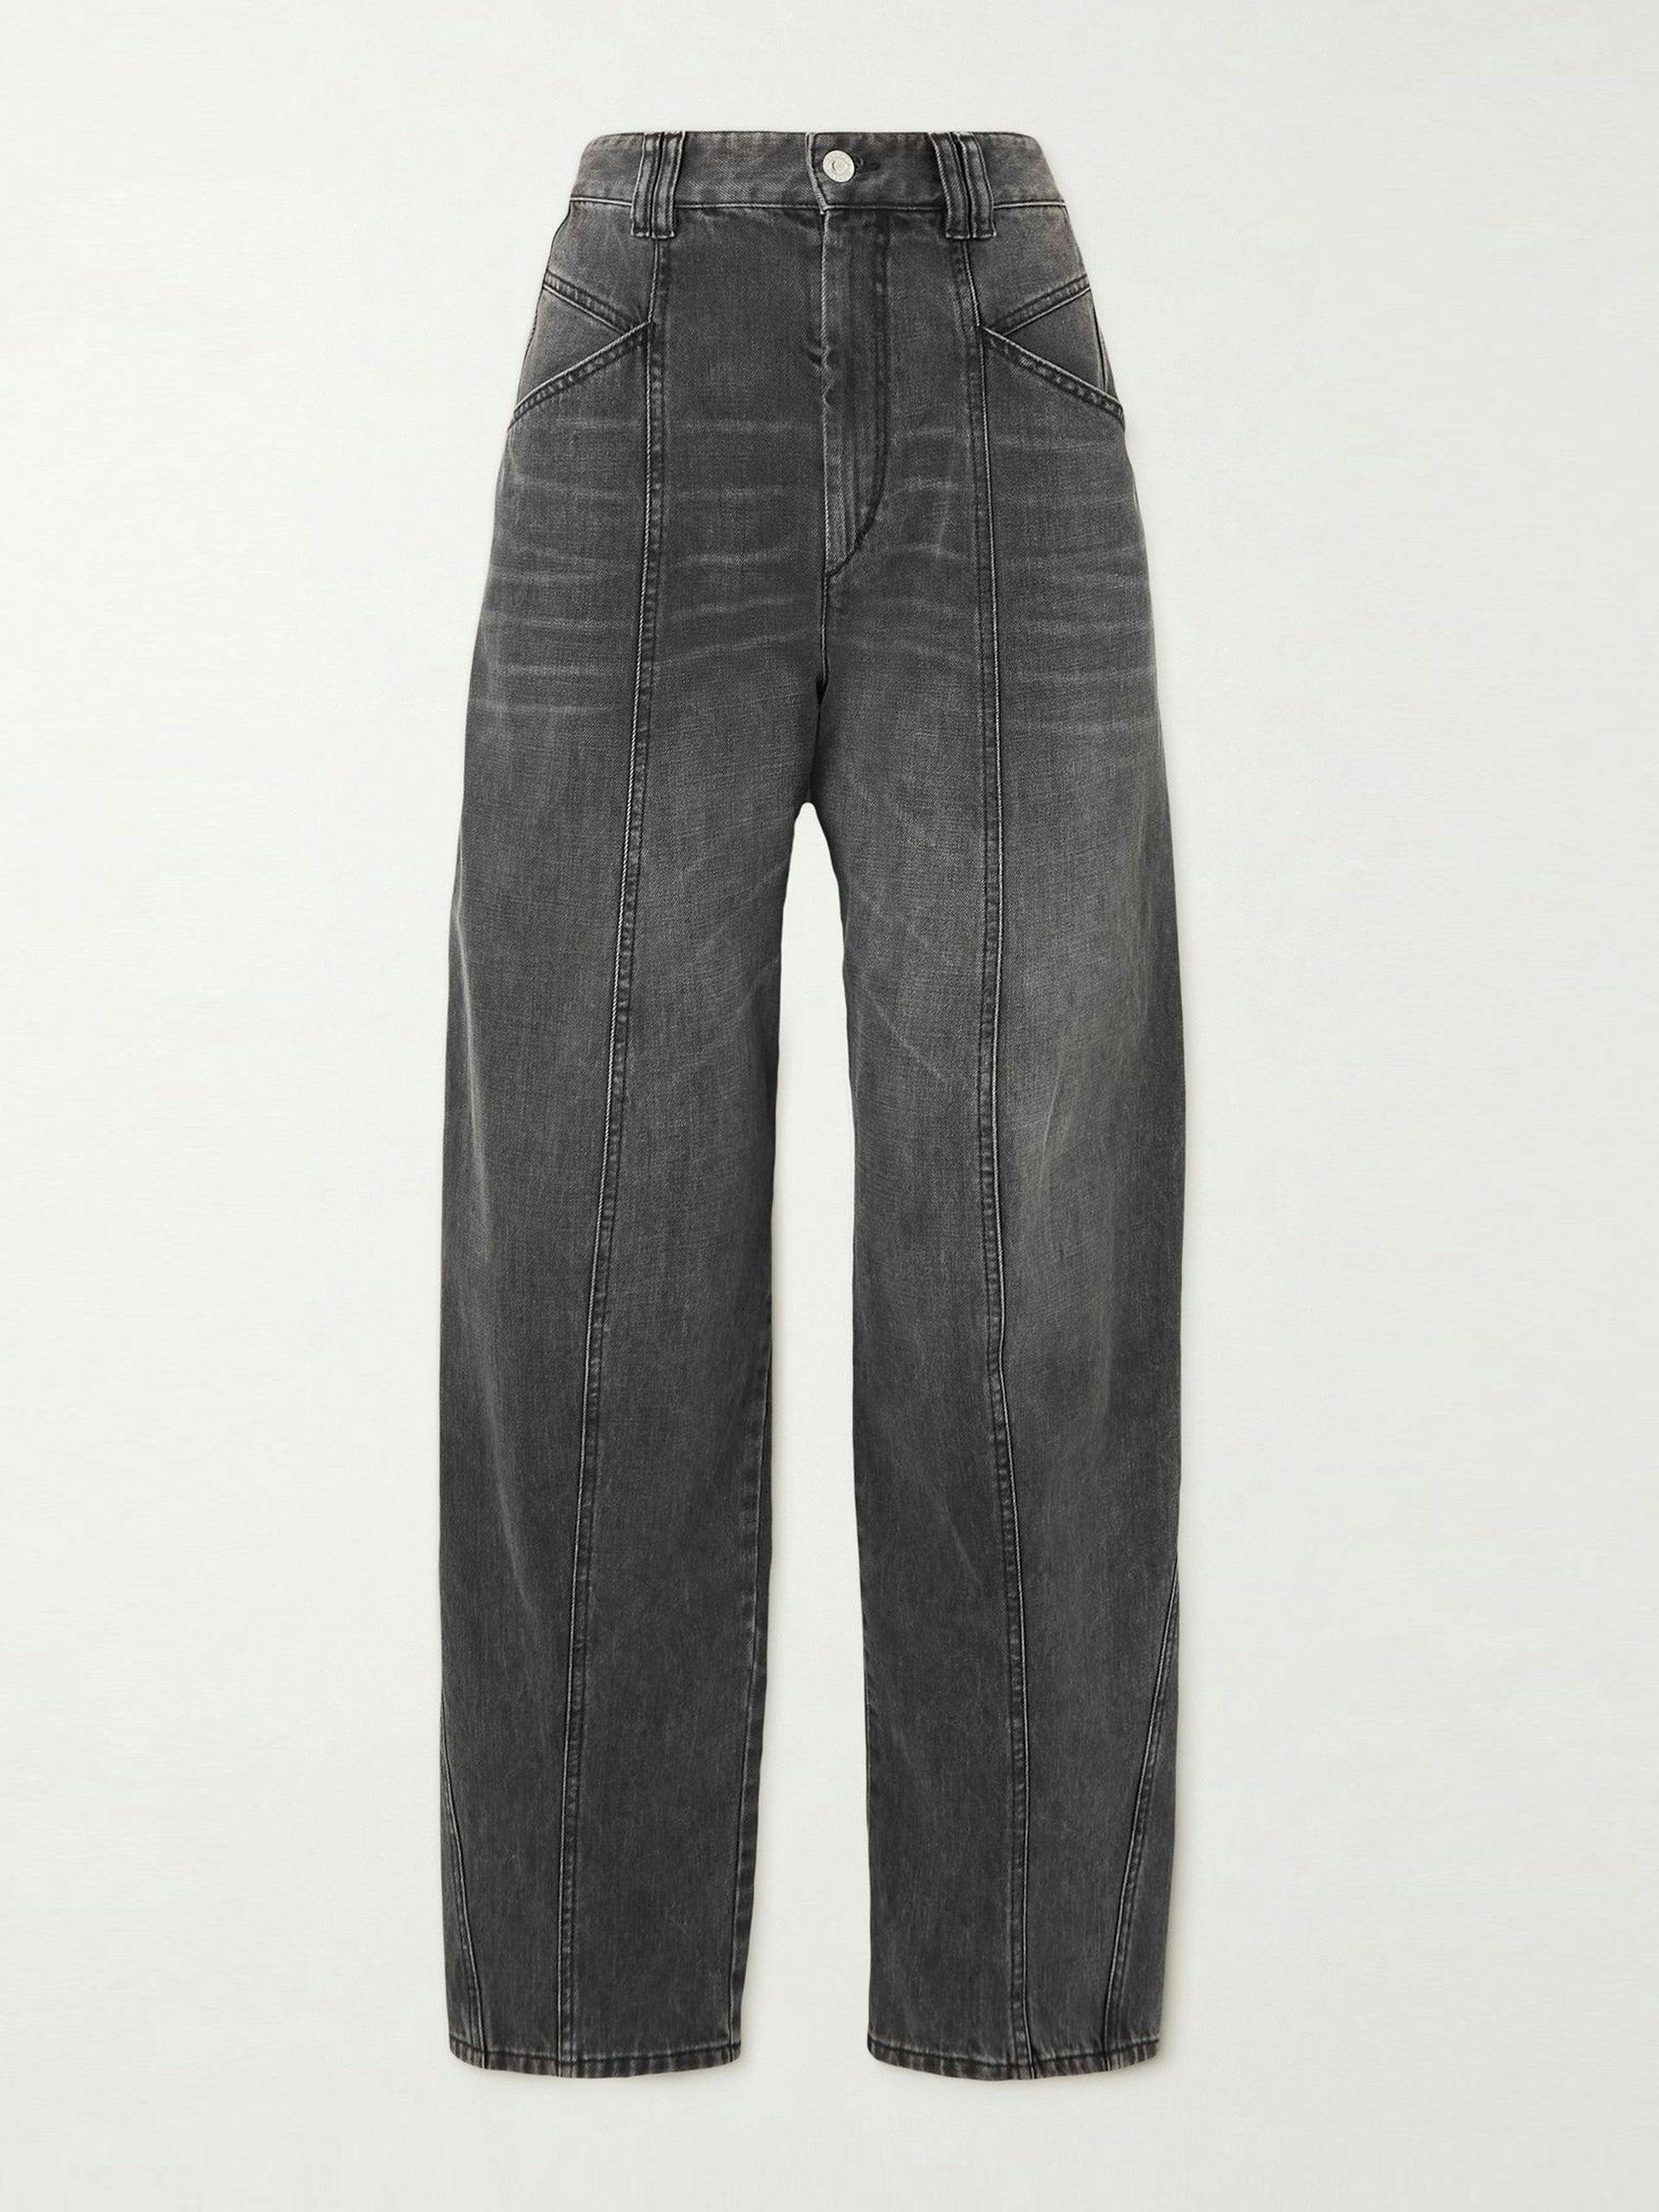 Black high-rise tapered jeans